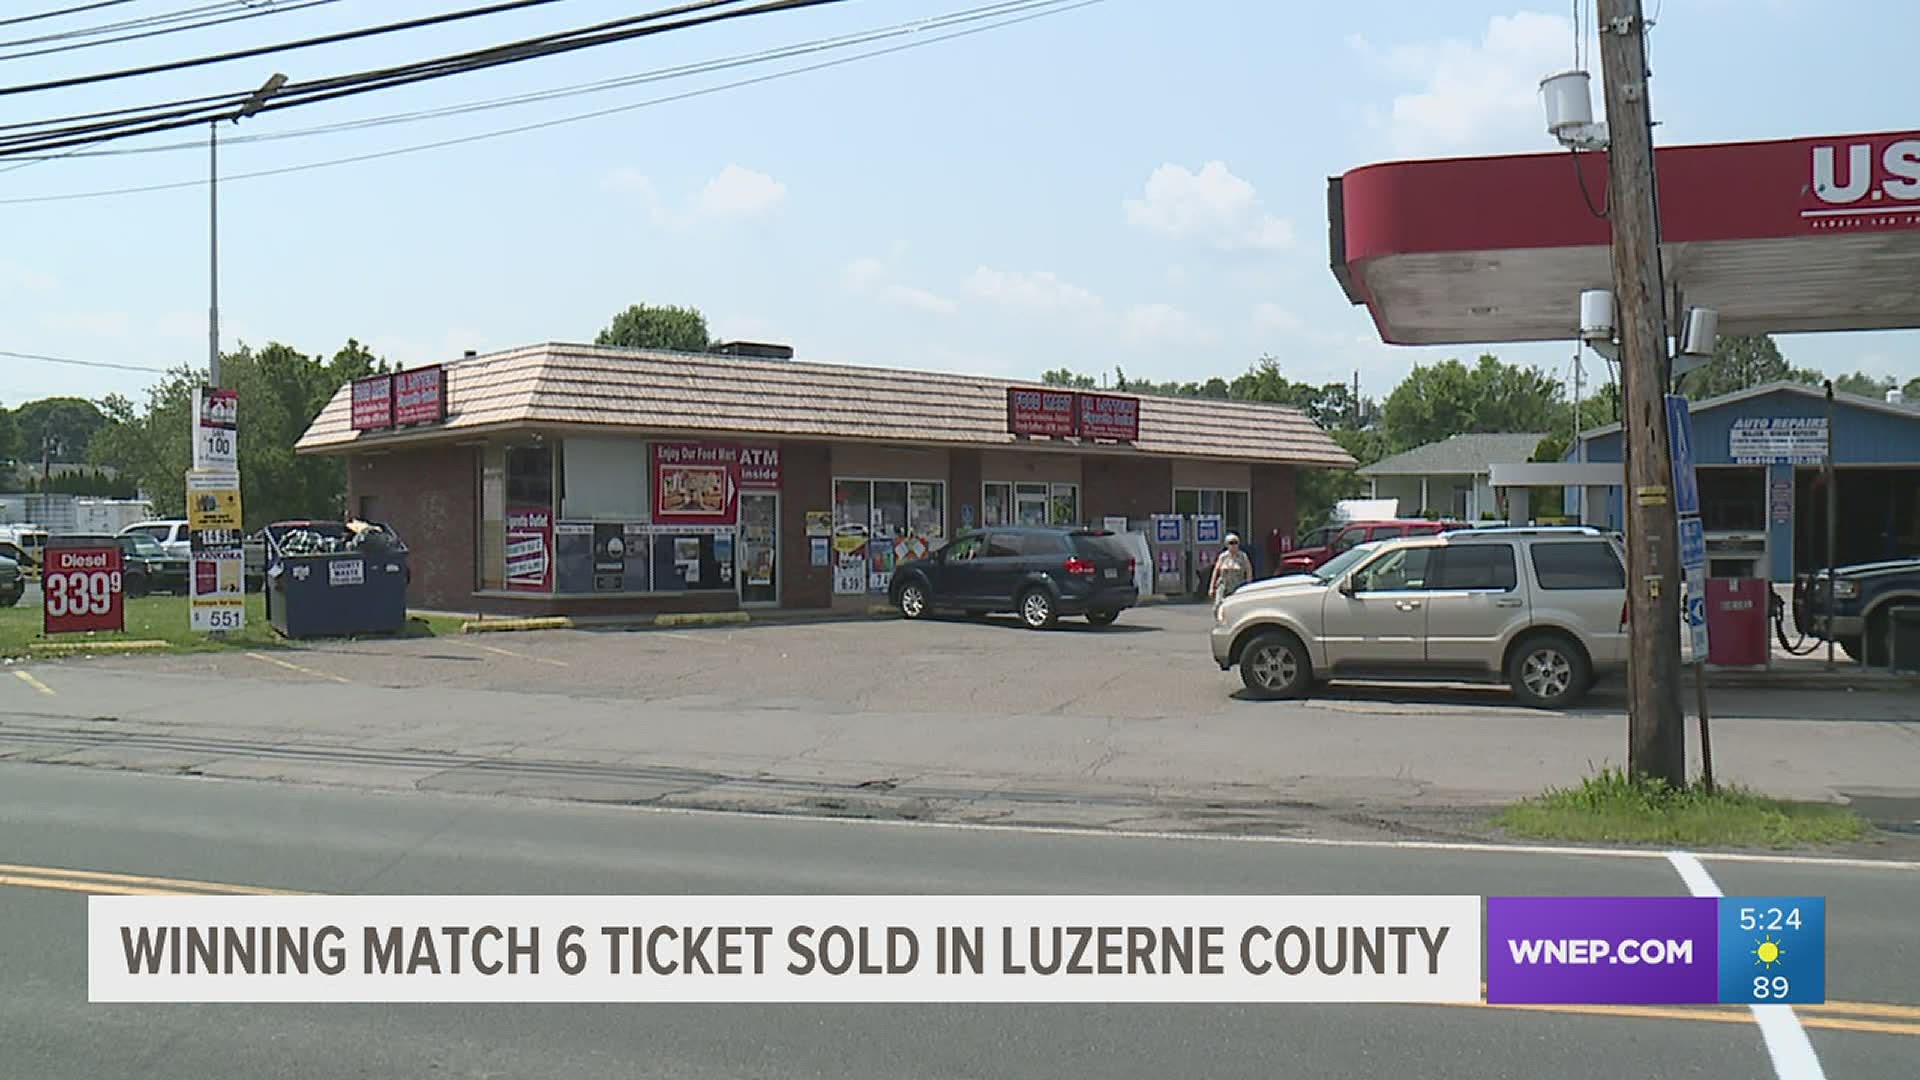 K & S Convenience in West Pittston sold the big winner.